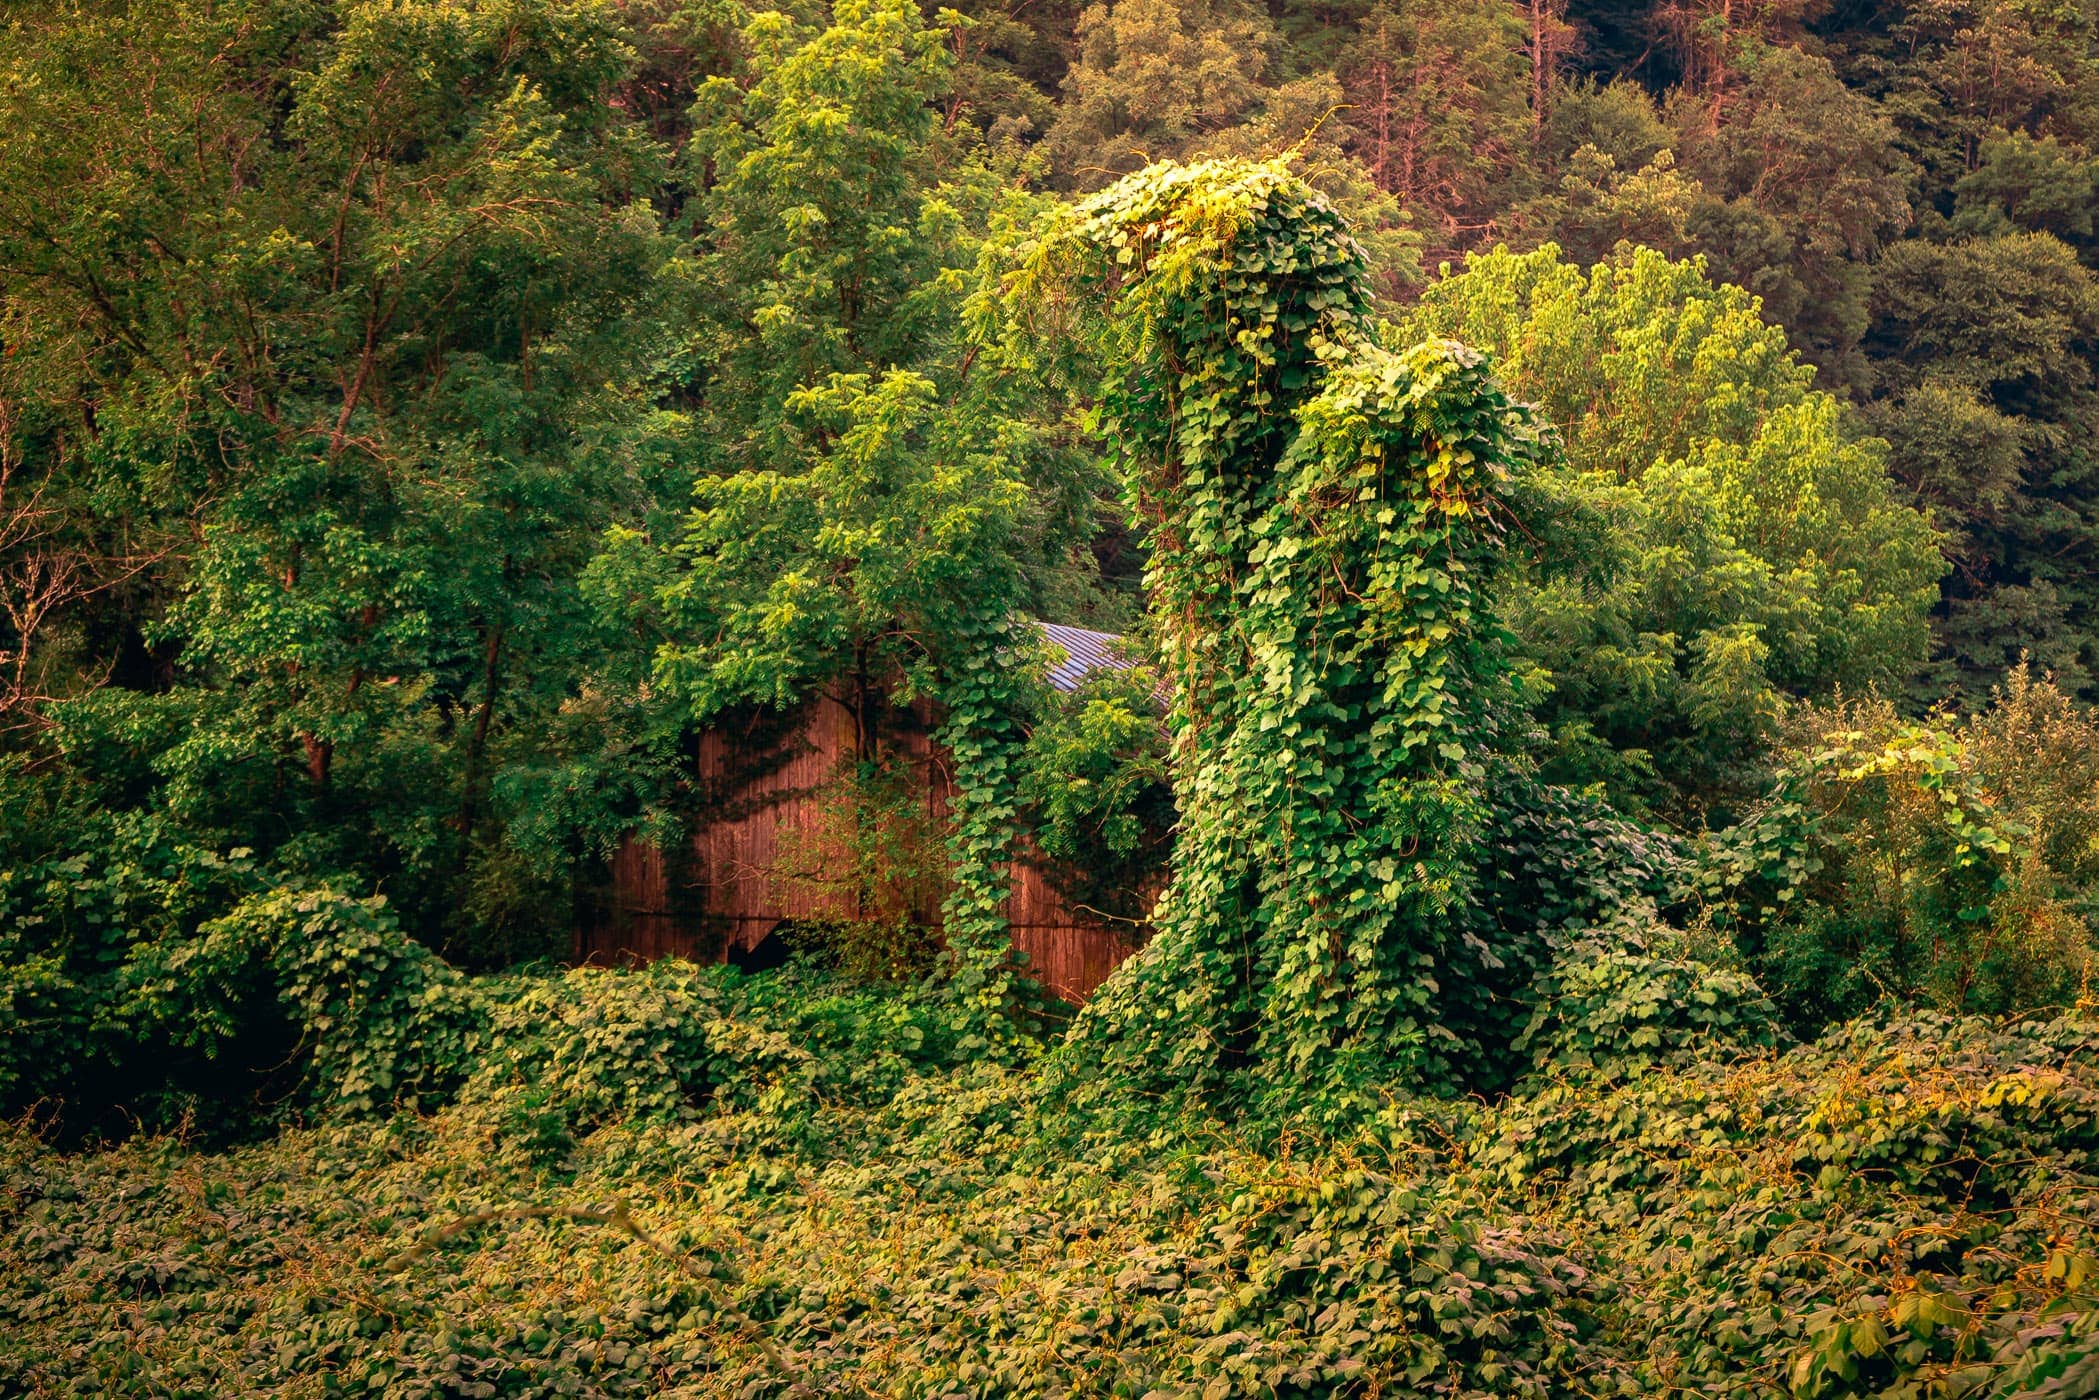 A barn overgrown with kudzu near Pigeon Forge, Tennessee.